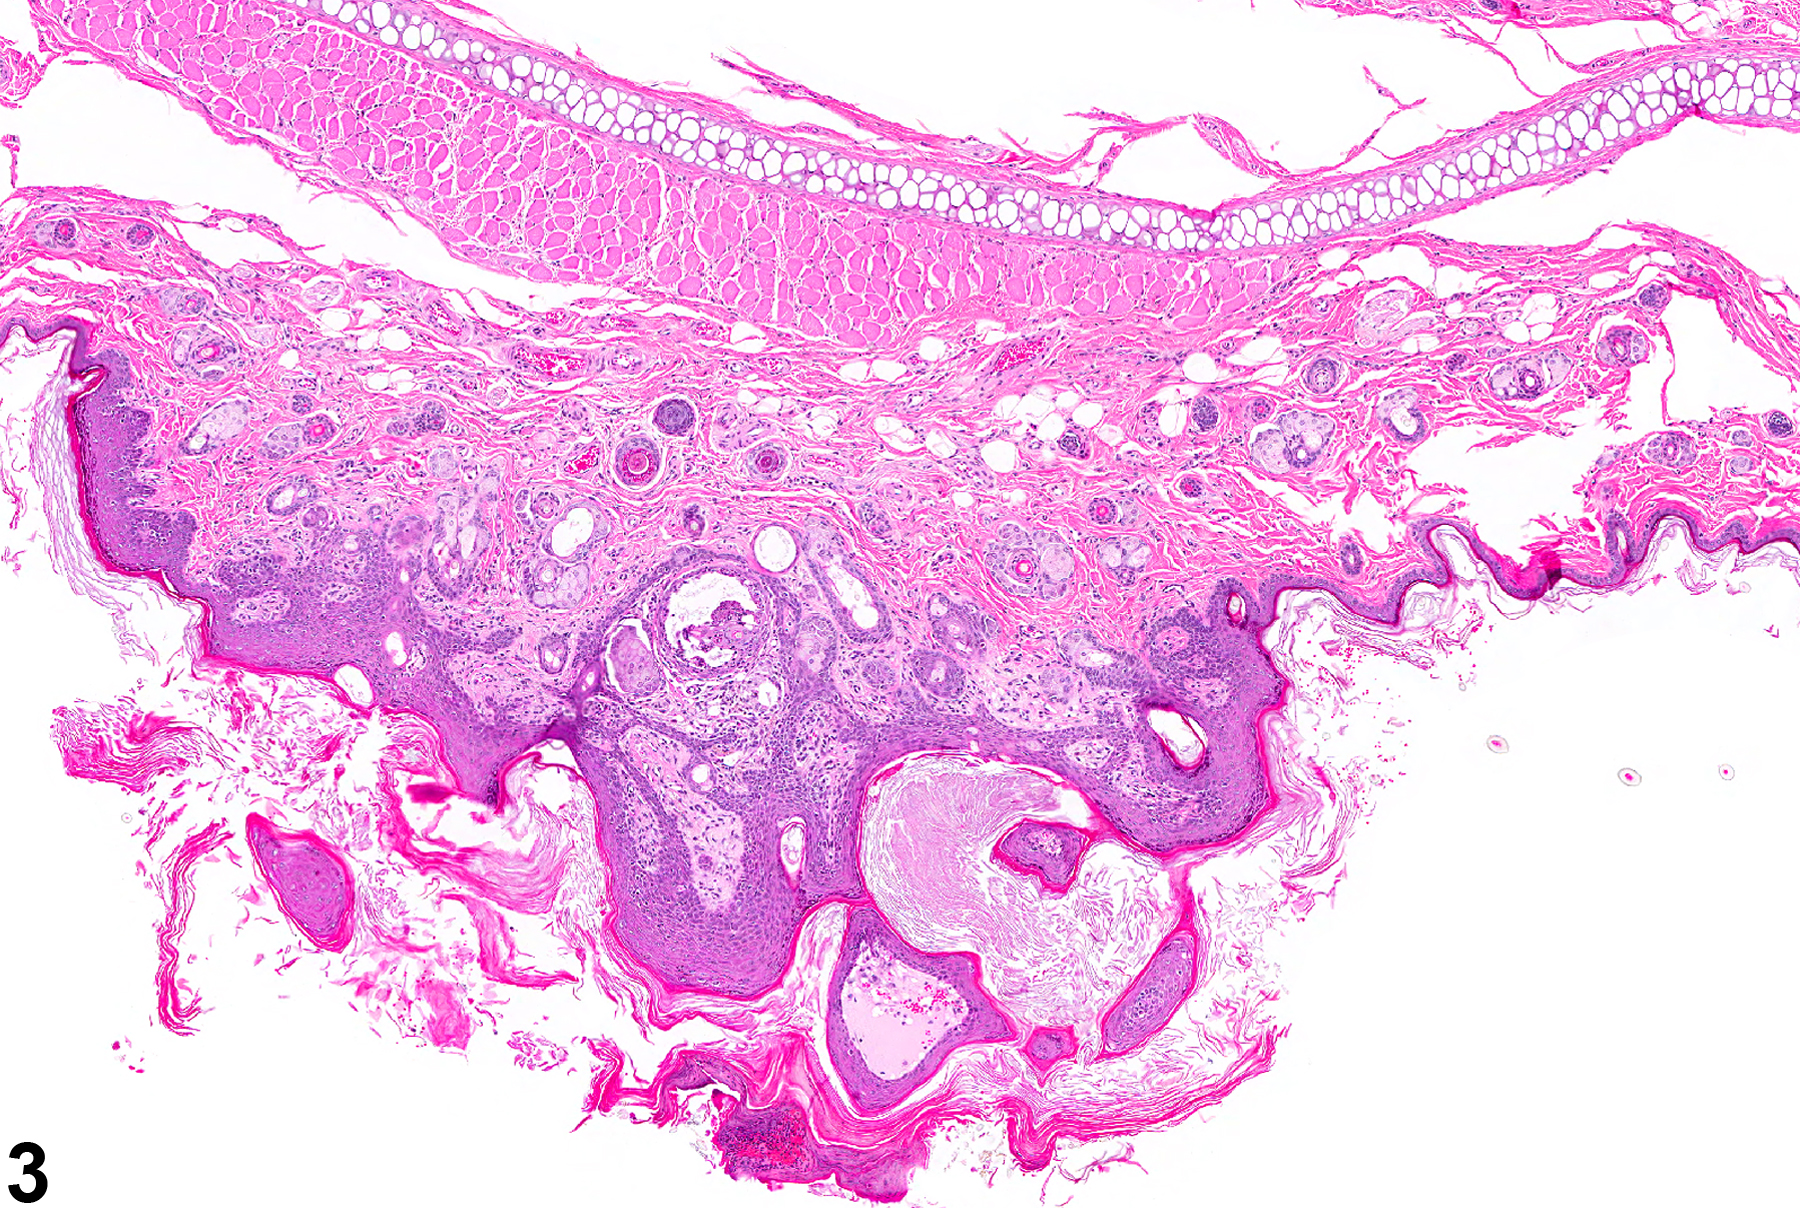 Image of epithelium hyperplasia in the ear from a male F344/N rat in a chronic study